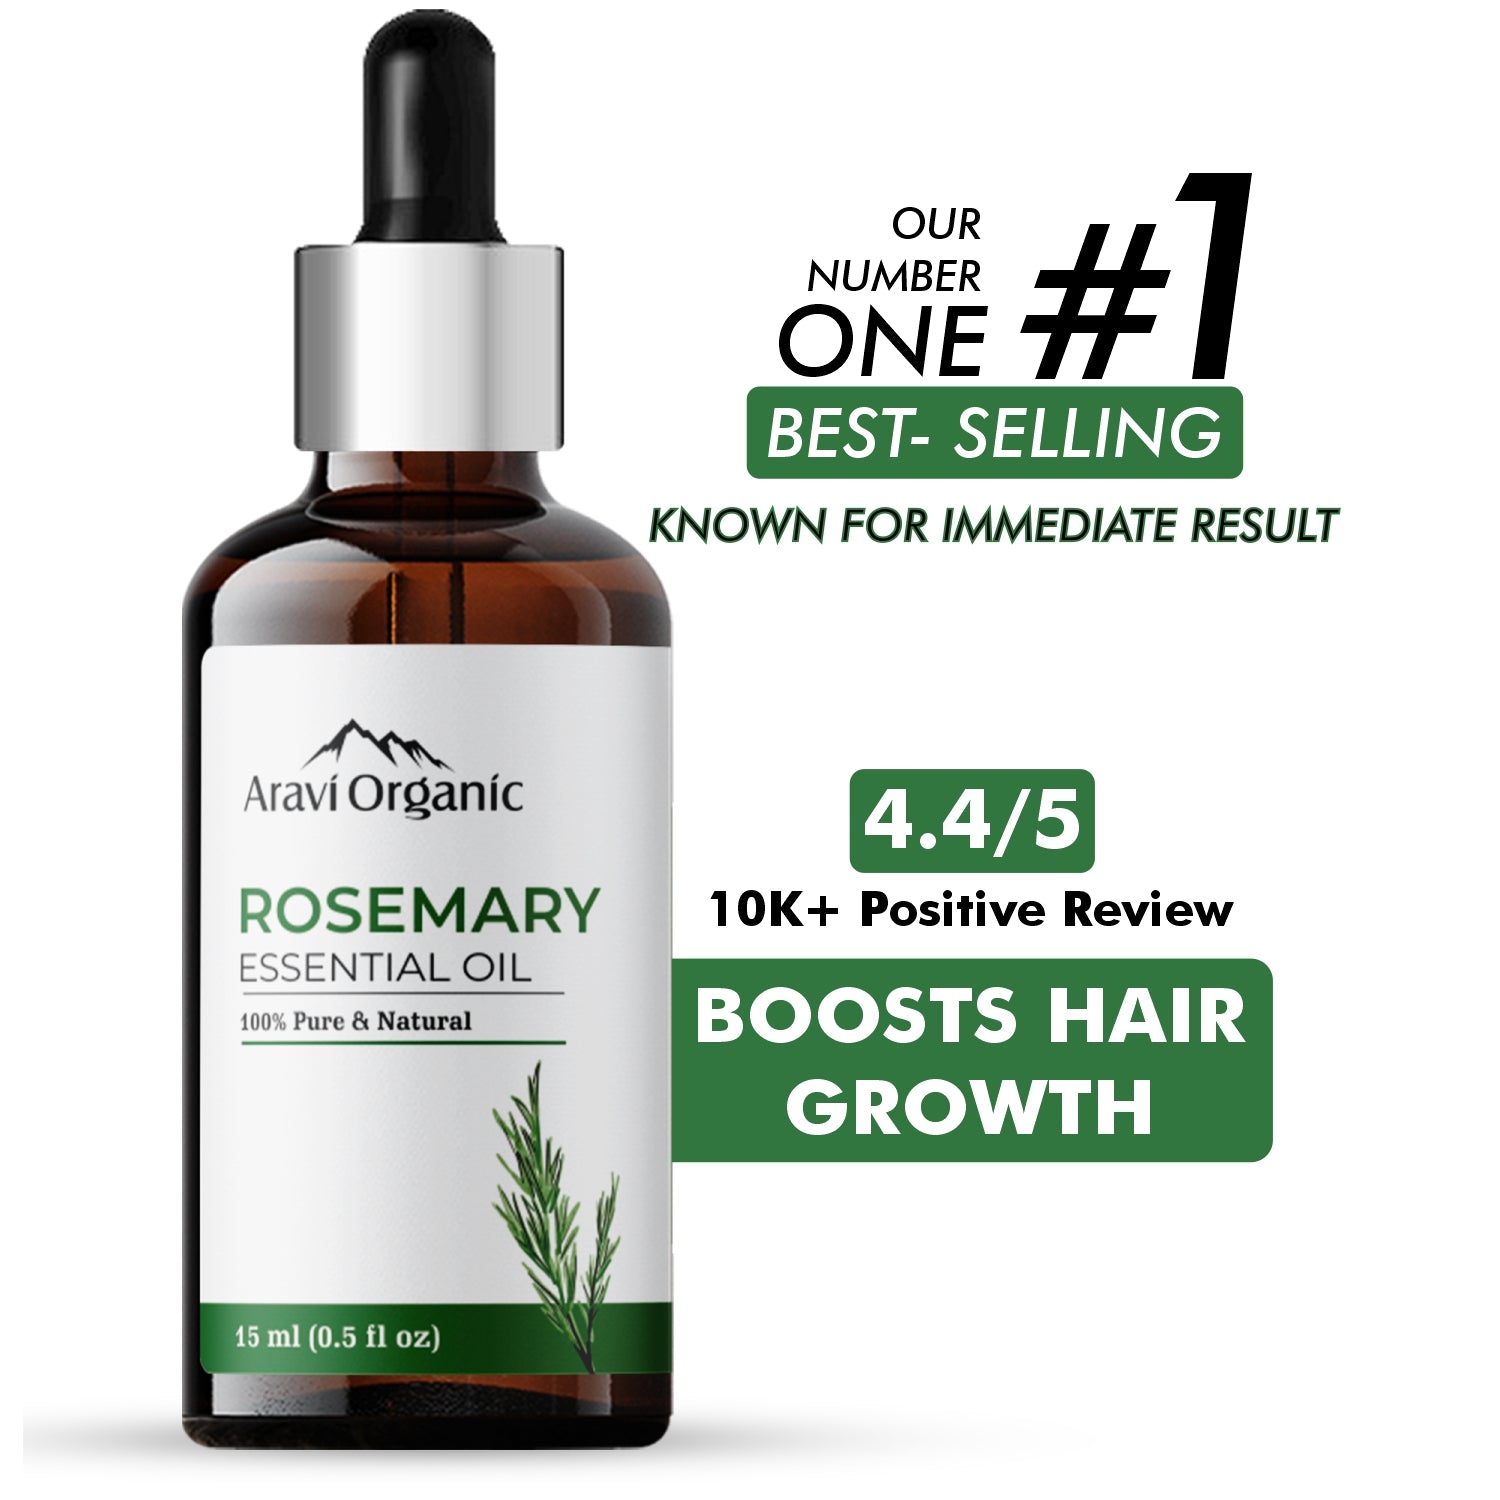 Rosemary Essential Oil for Hair Growth.